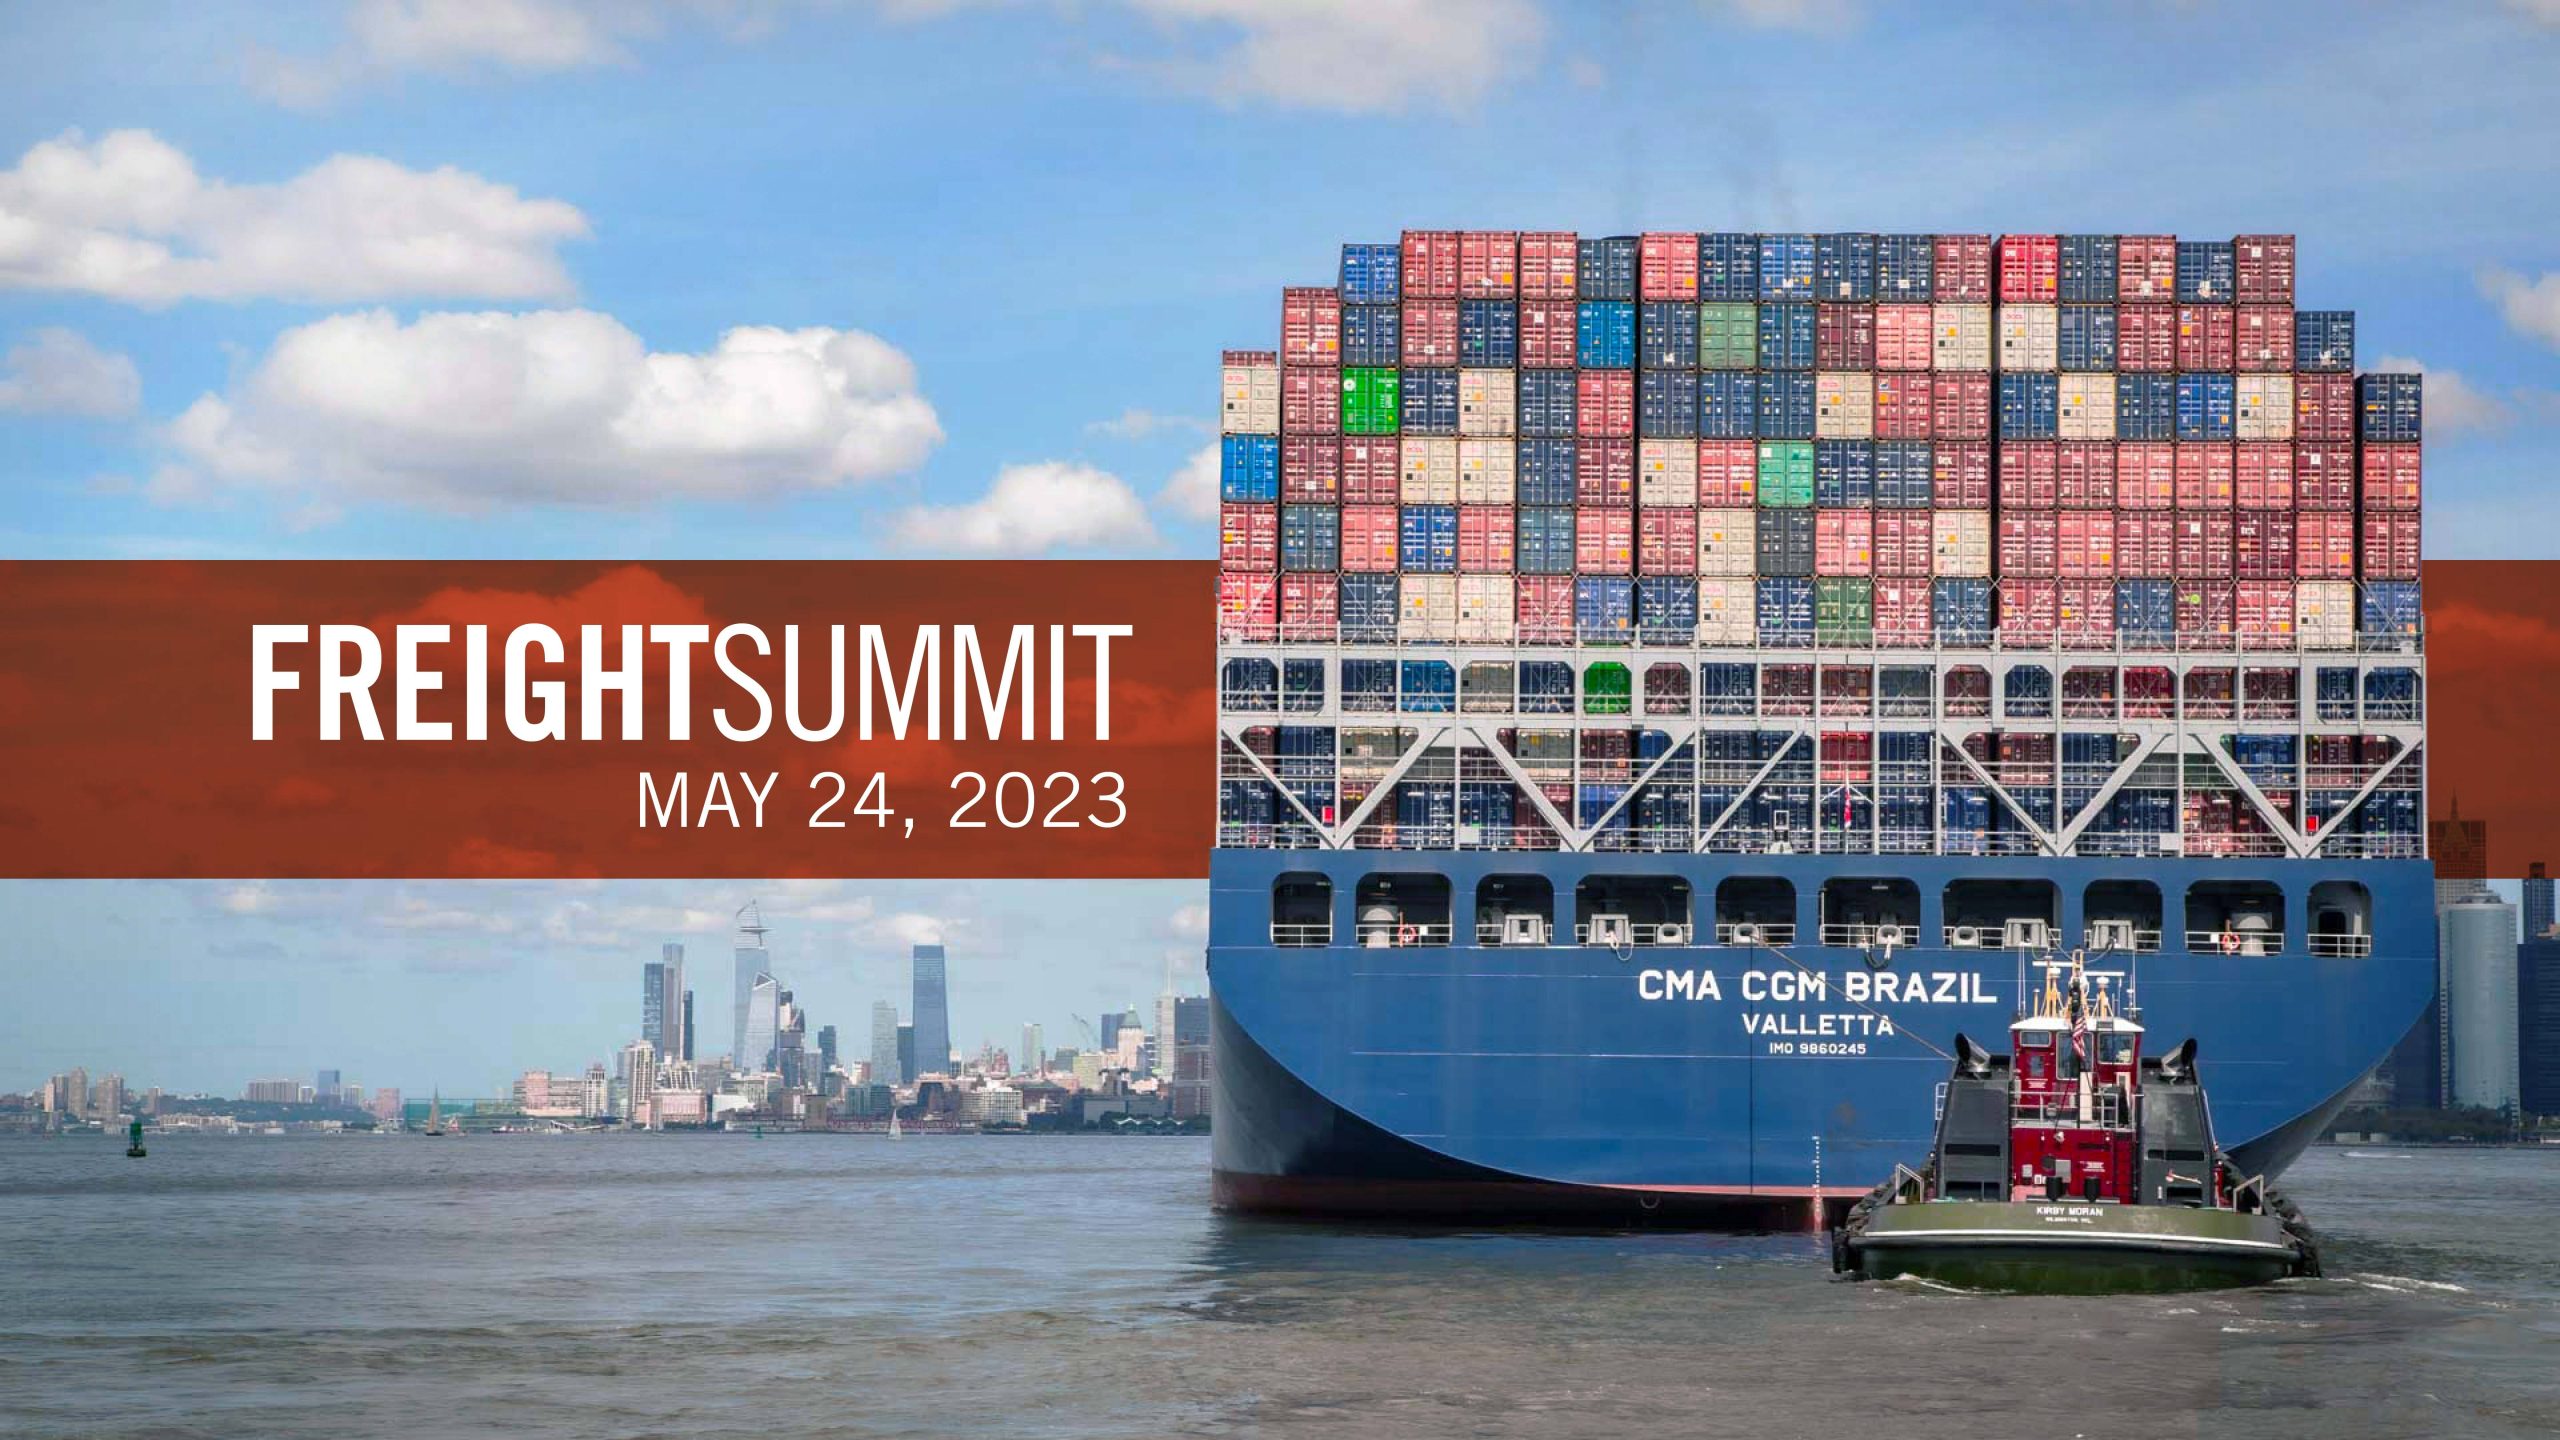 Graphic with image of cargo ship and text 2023 Freight Summit